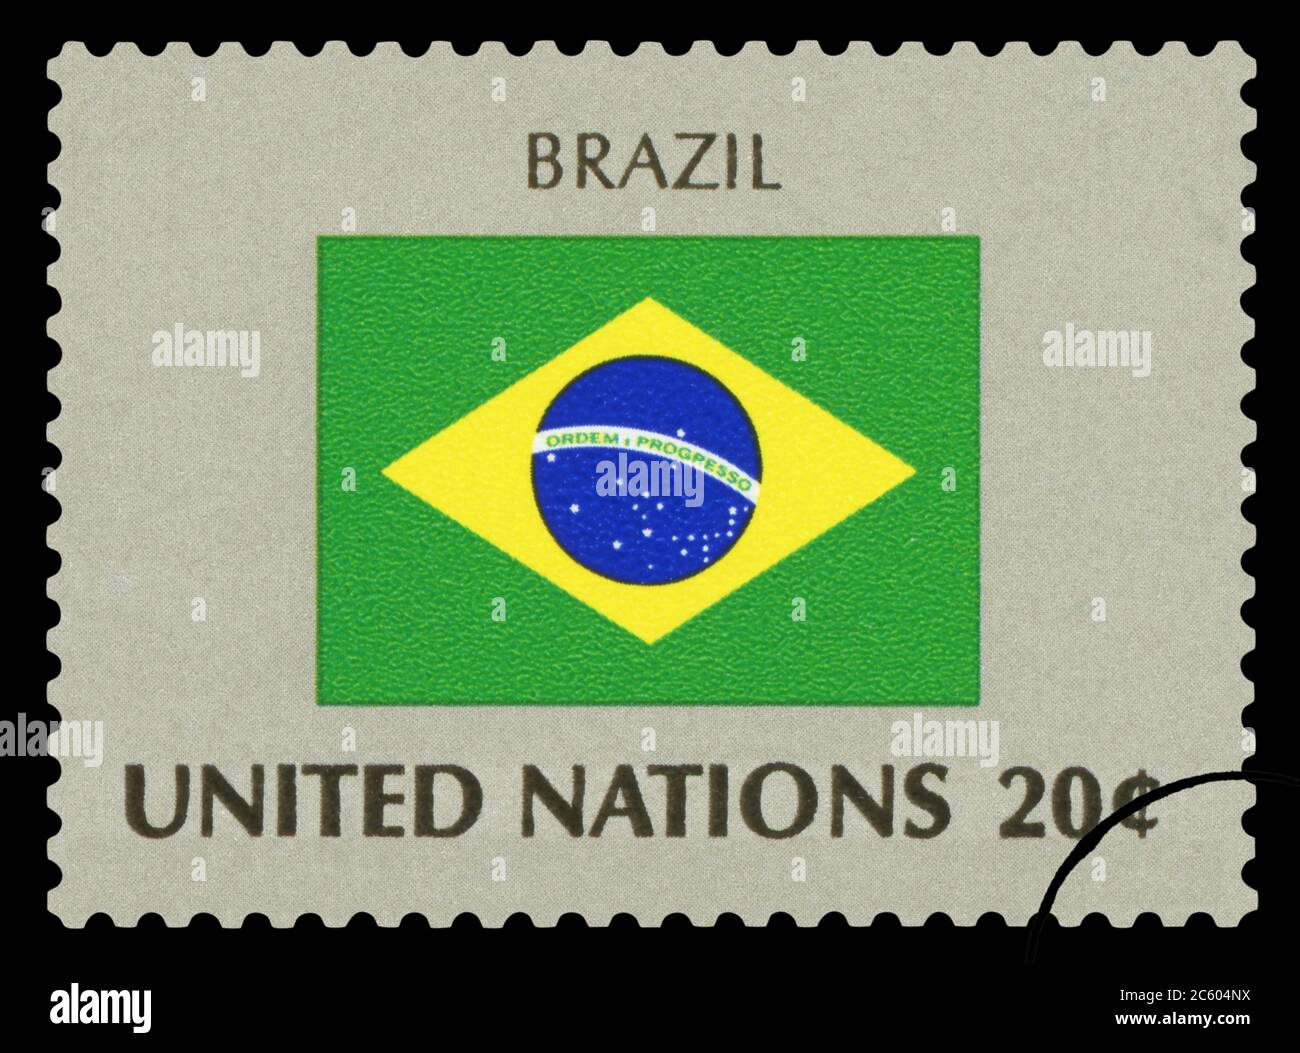 BRAZIL - Postage Stamp of Brazil national flag, Series of United Nations, circa 1984. Stock Photo